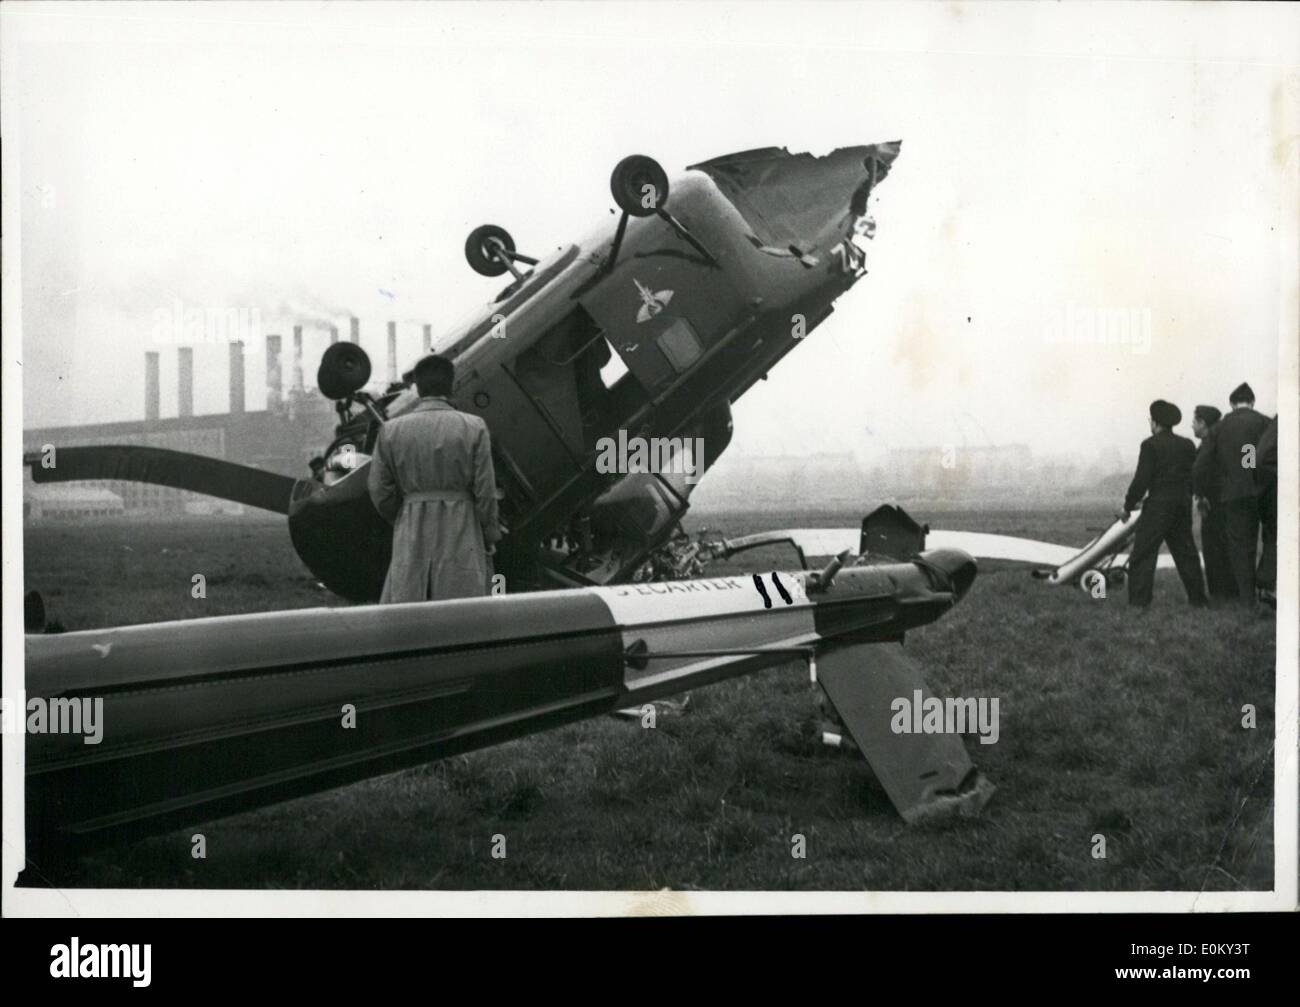 Nov. 11, 1952 - Crash of a Sikorsky S.55 helicopter.: A Sikorsky S.55 tranport helicopter recently crashed at a demonstration at Issy-les-Moulineaux during the landing. The pilot and six passengers escaped the injuries. Photo shows the helicopter after the crash. Stock Photo